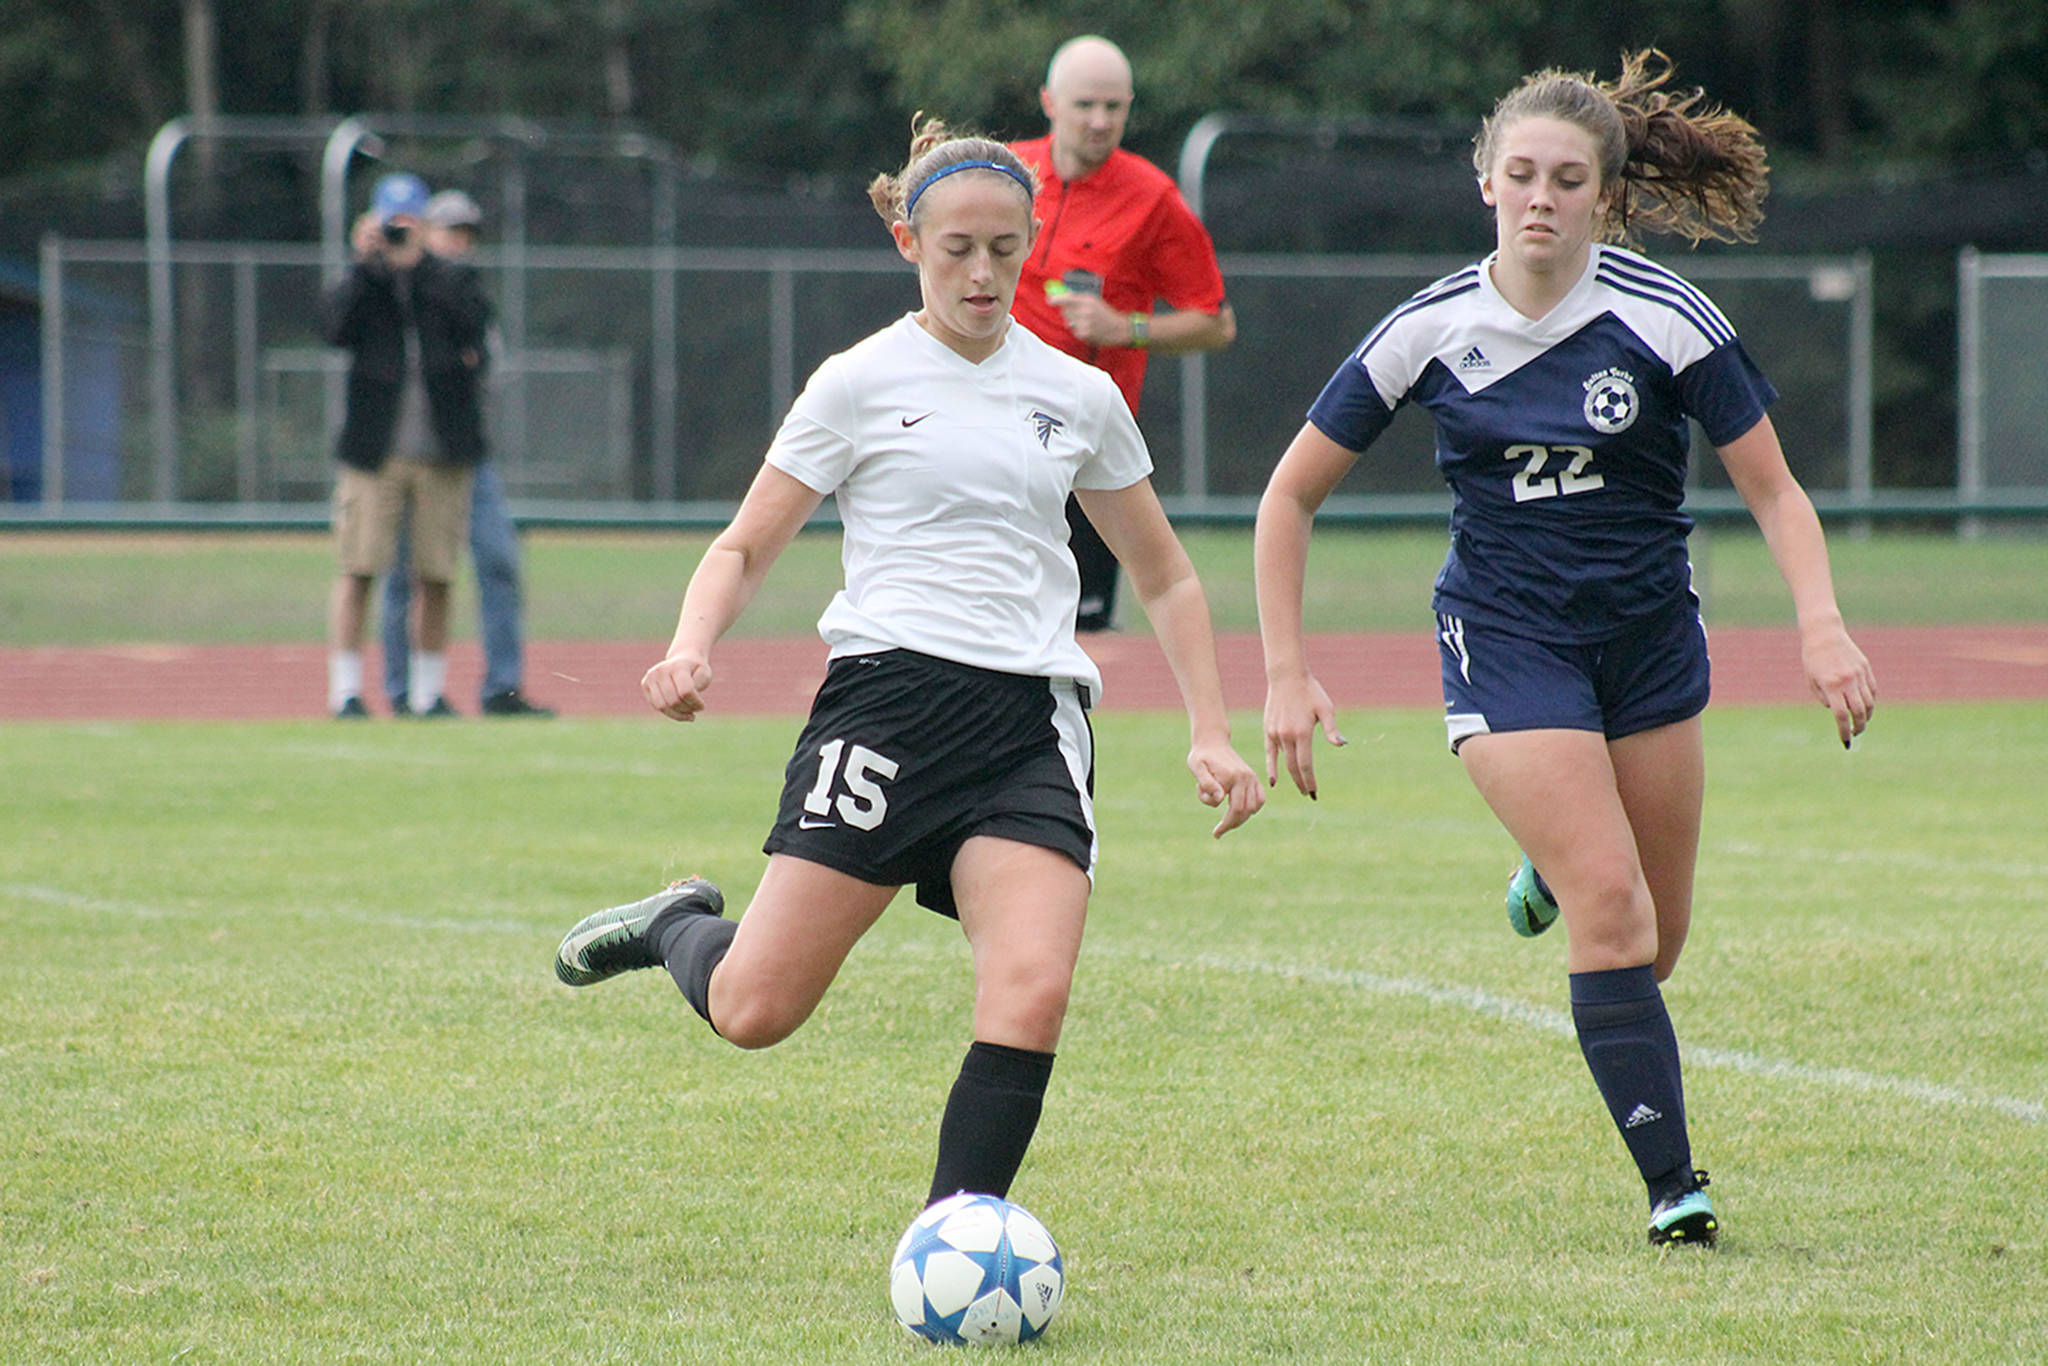 Falcon girls soccer one win shy of state berth